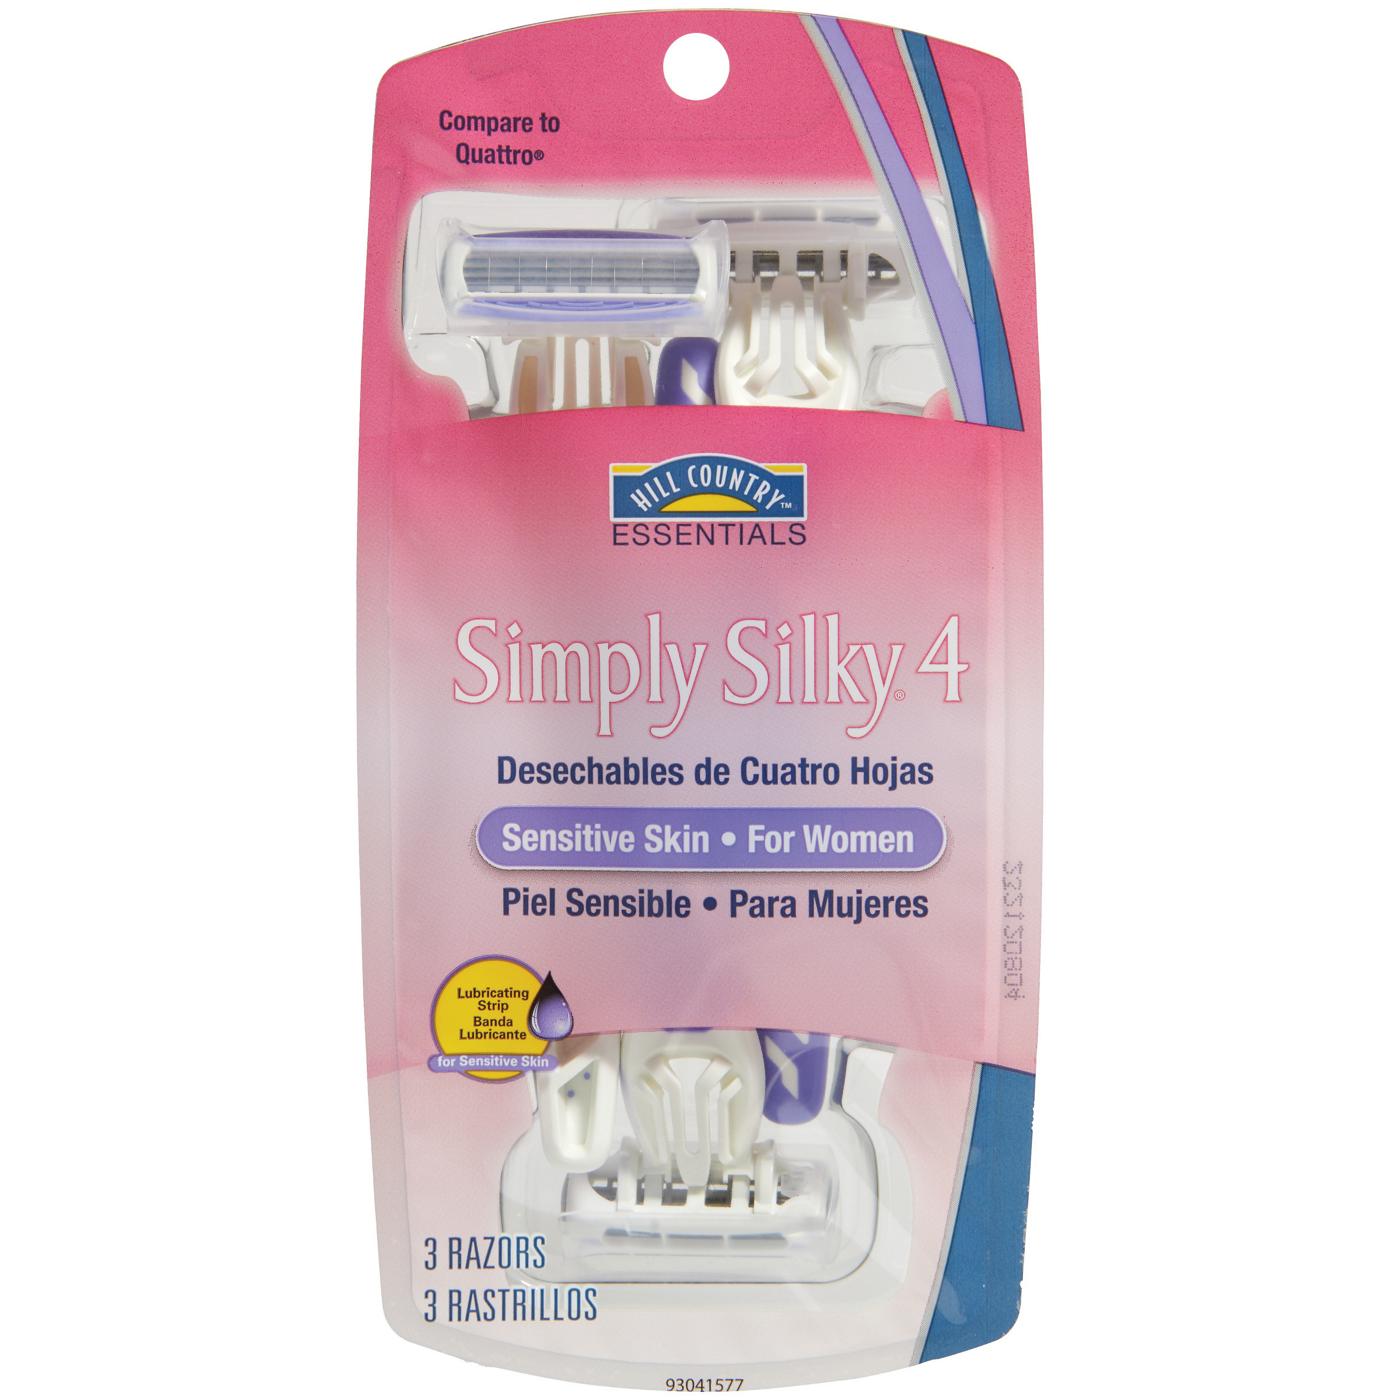 Hill Country Essentials Simply Silky 4 Women's Disposable Razors